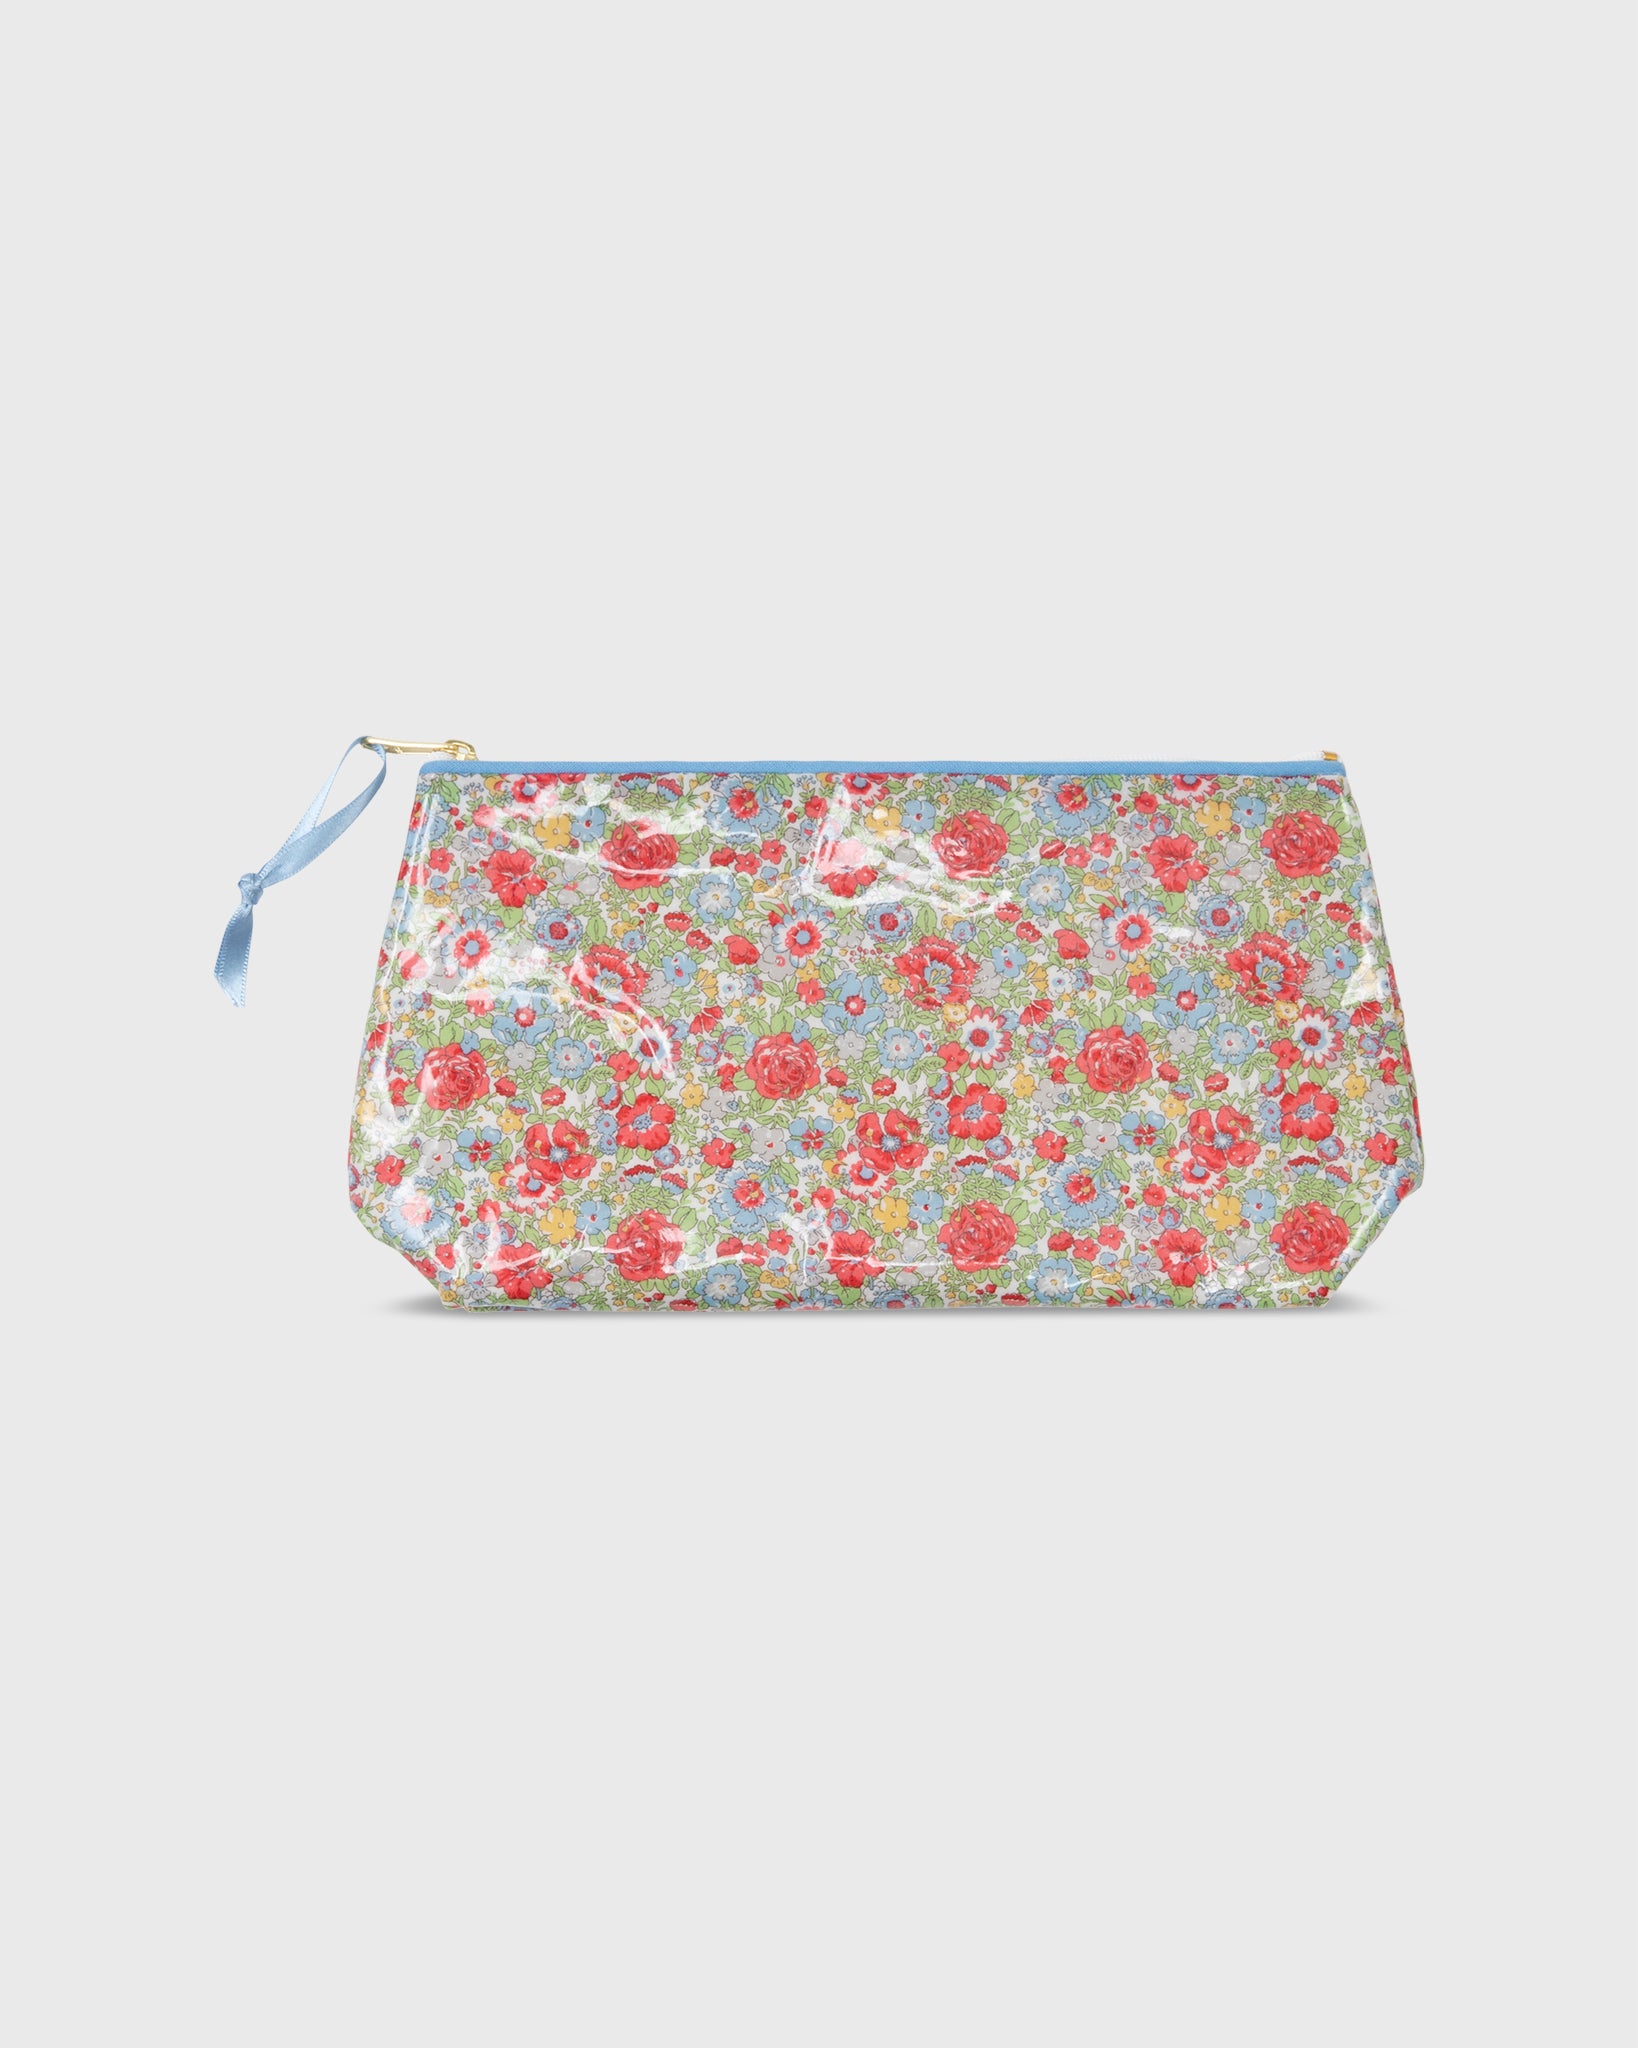 Coated Small Cosmetic Bag in Light Green/Red Amelie Liberty Fabric